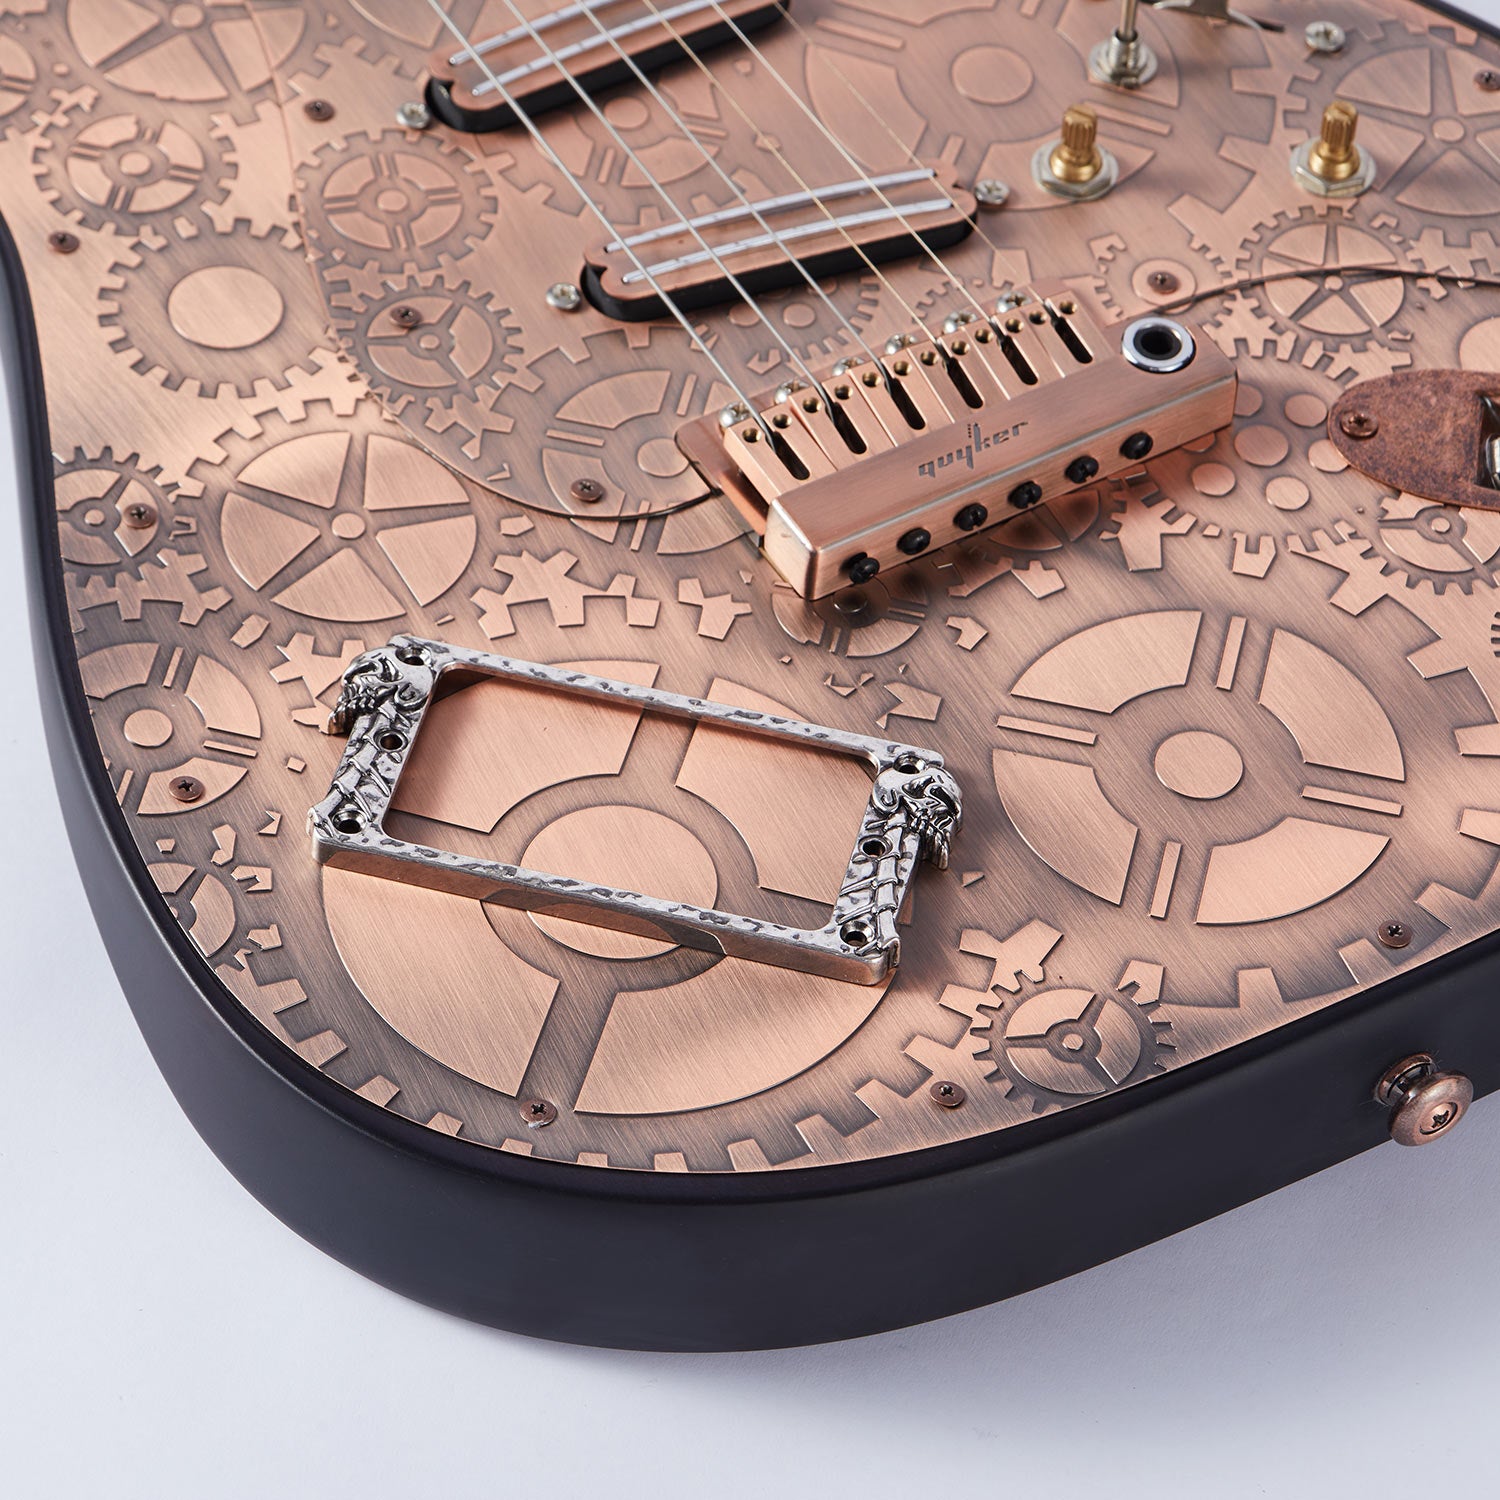 A premium pickup frame designed for a variety of electric guitars.